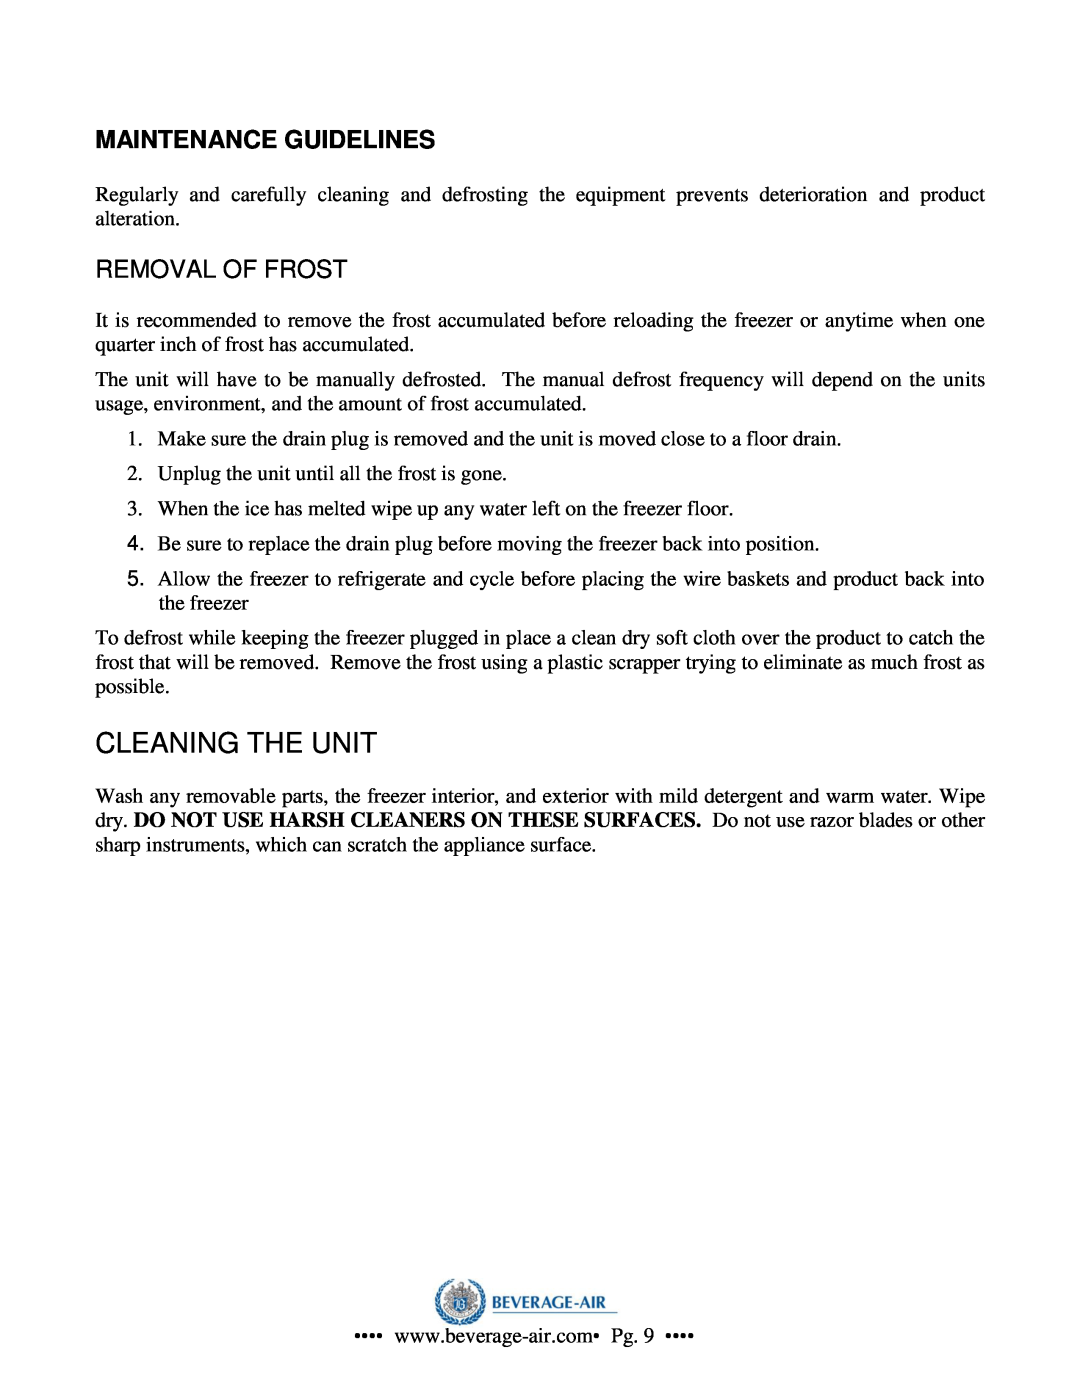 Beverage-Air NC41, NC33, NC49, NC27 operation manual Cleaning The Unit, Maintenance Guidelines 